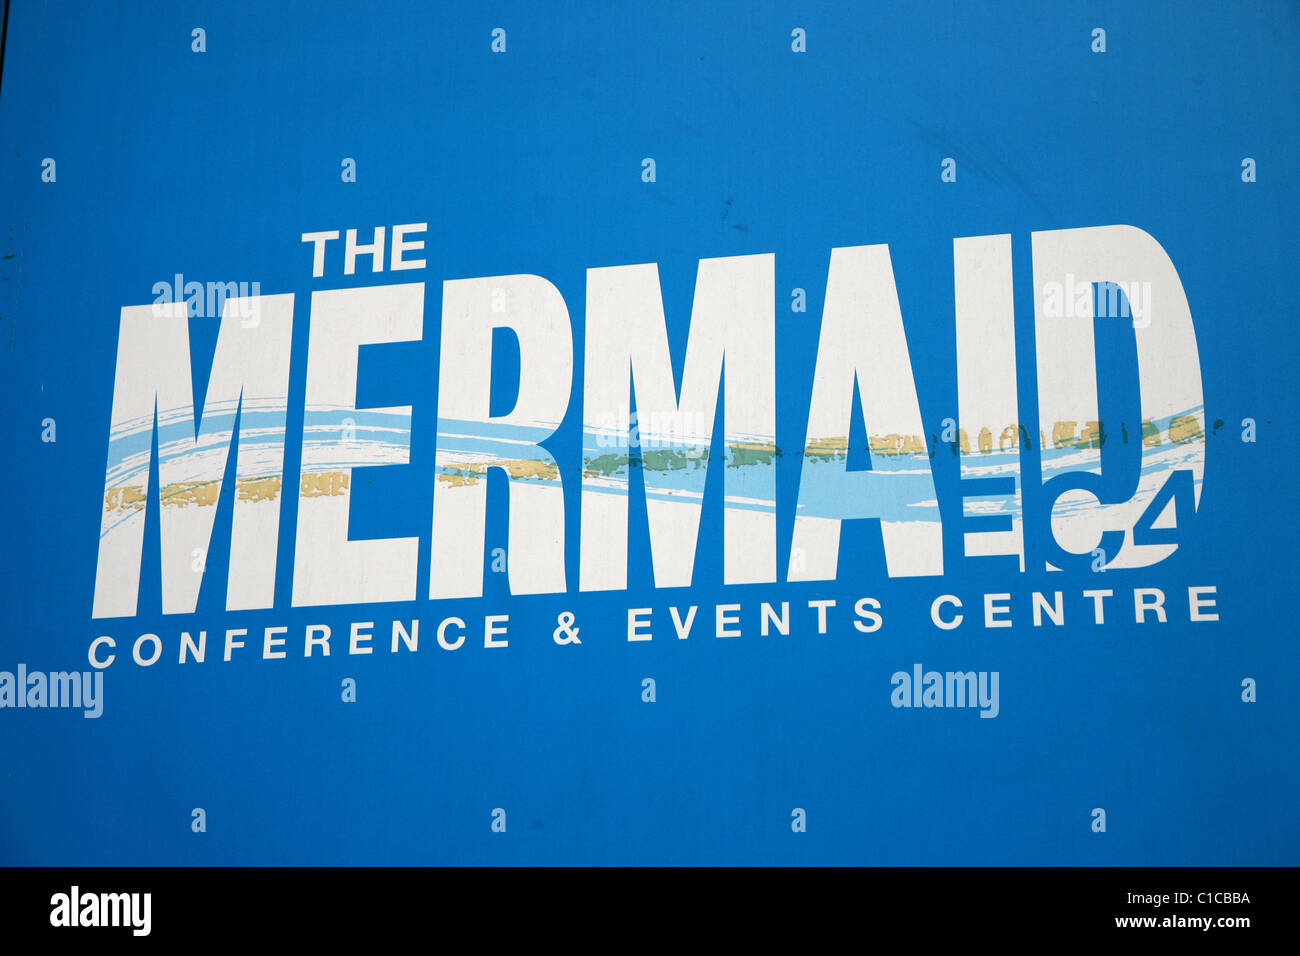 General View gv of the Mermaid Conference and Events Centre in London, England. Stock Photo